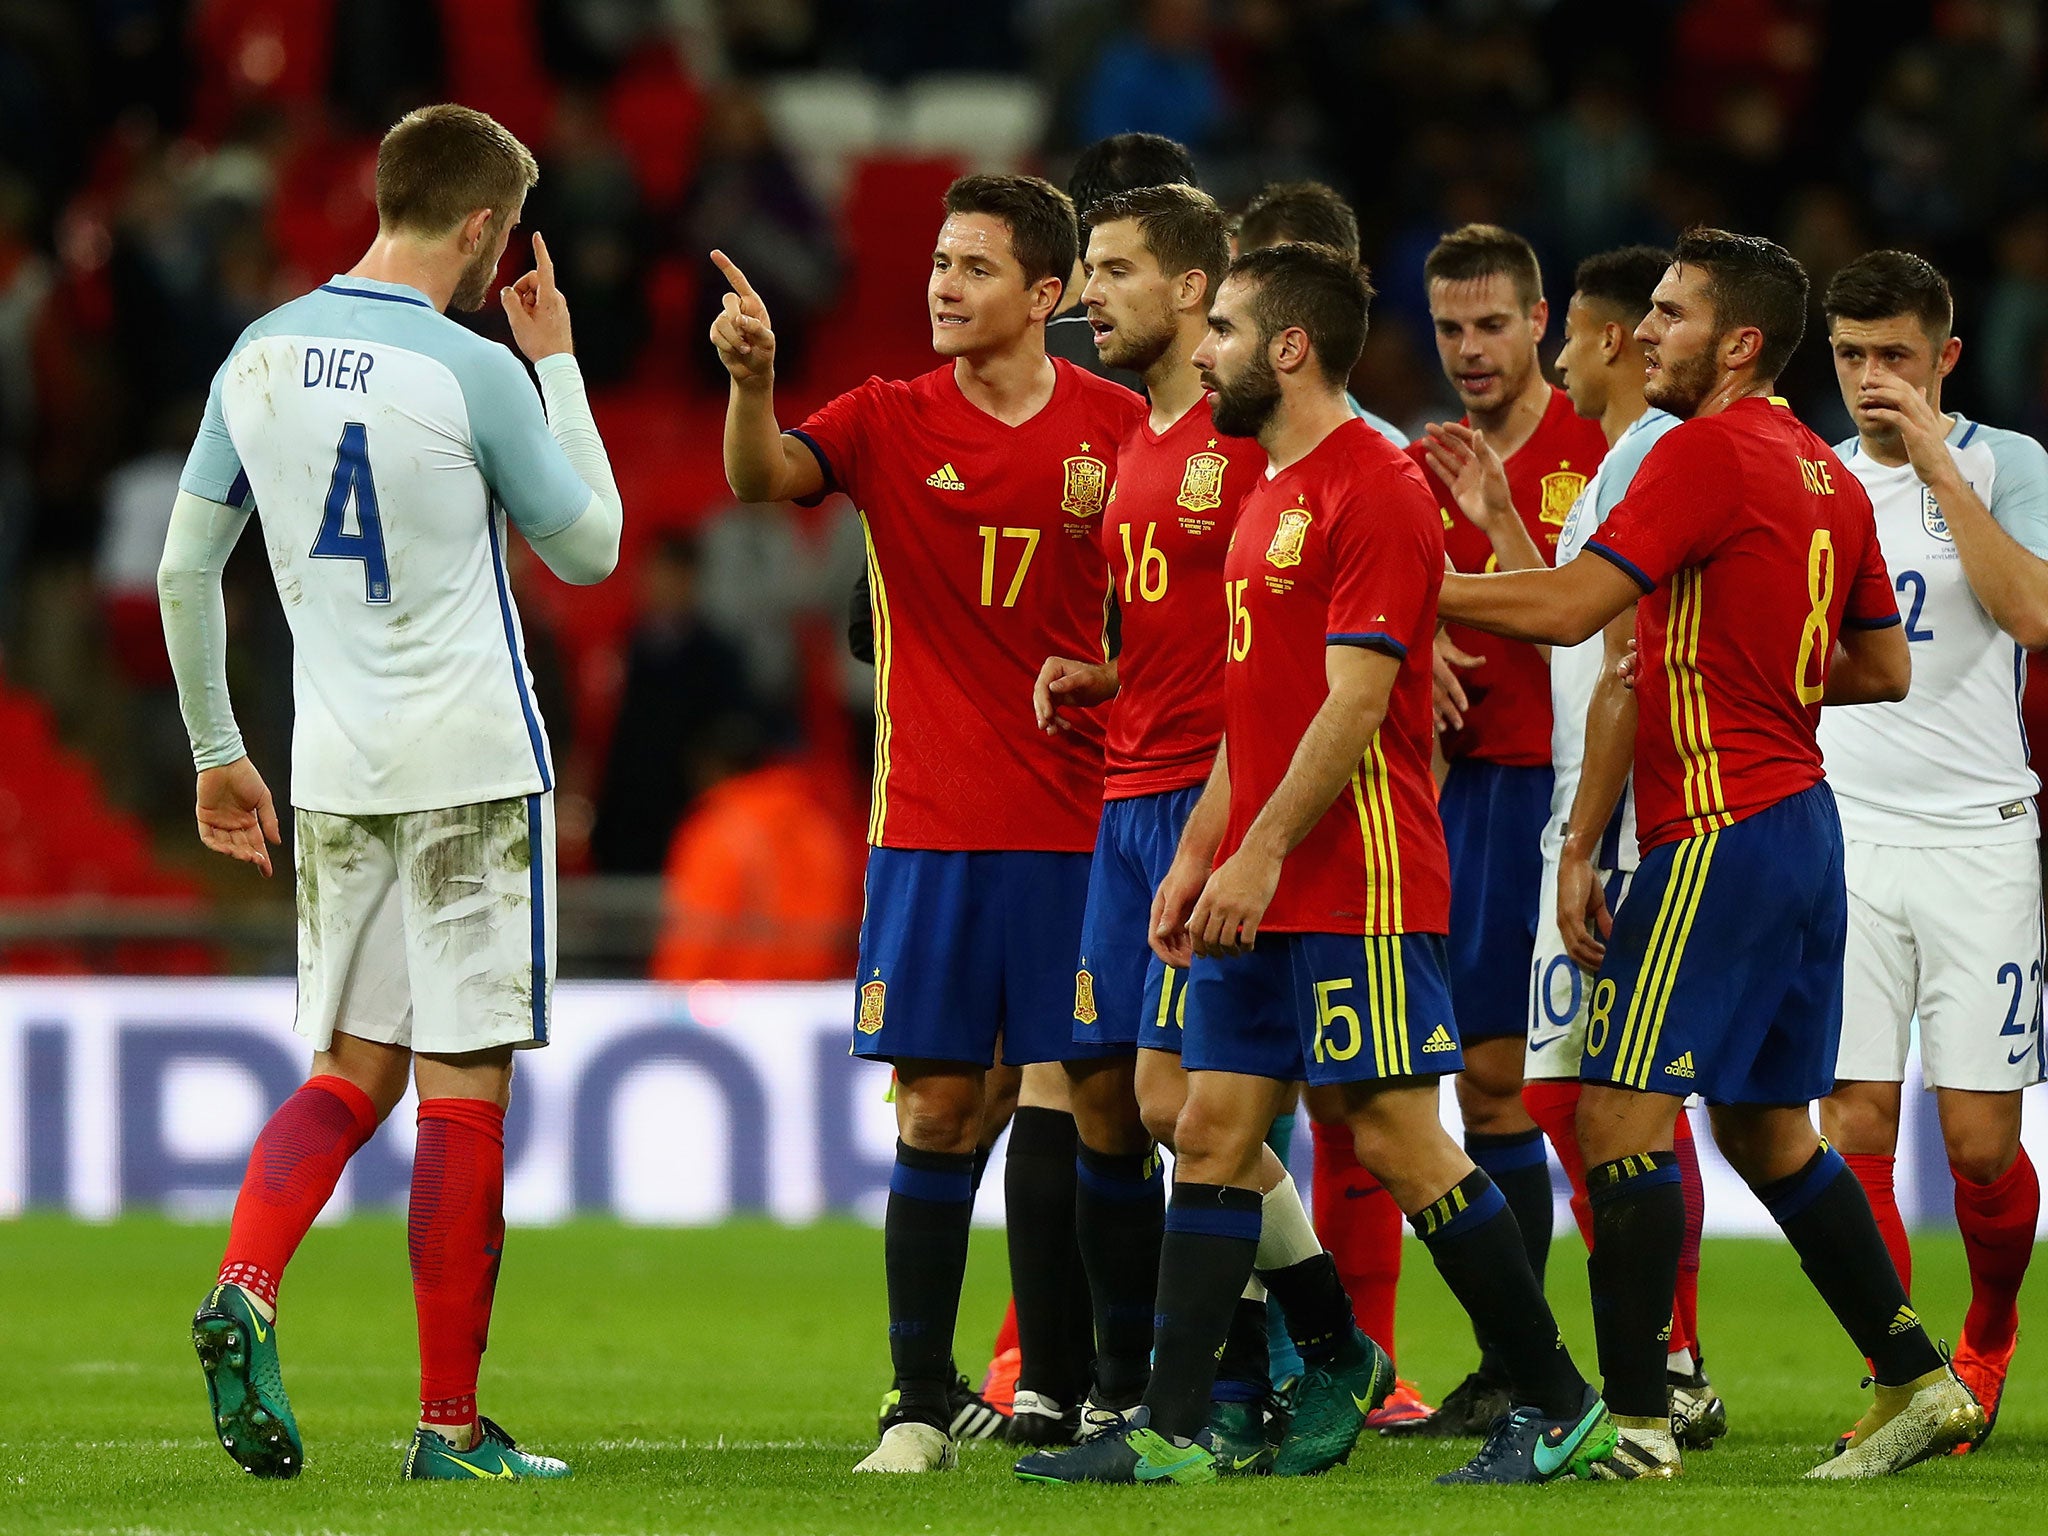 Dier and Herrera square up to one another during last month's international friendly between England and Spain